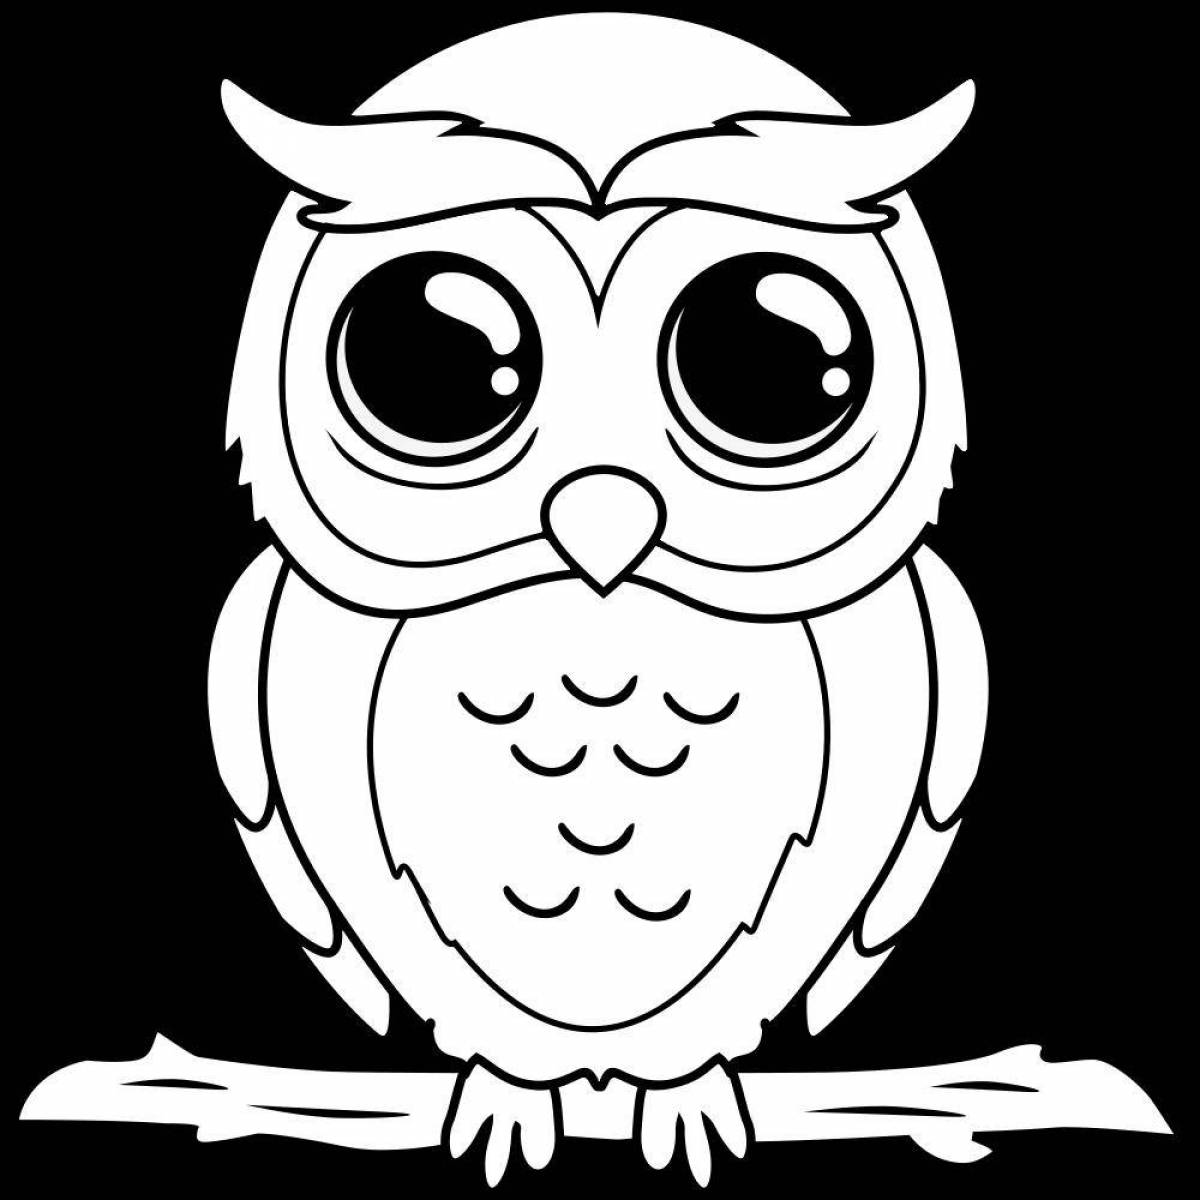 Harry Potter Owl Lovely Coloring Page